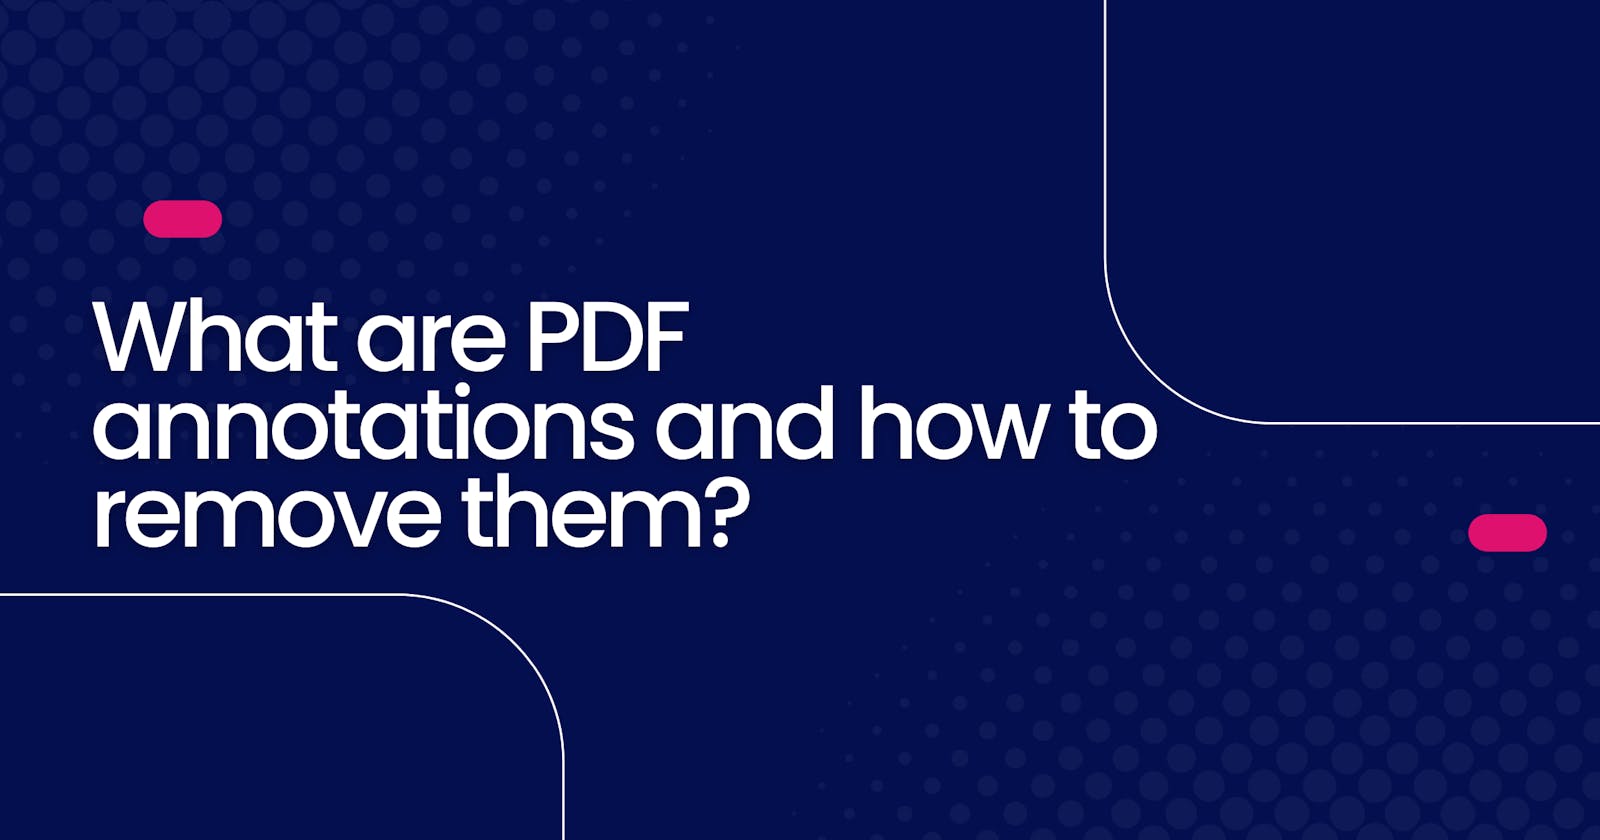 What are PDF annotations and how to remove them?